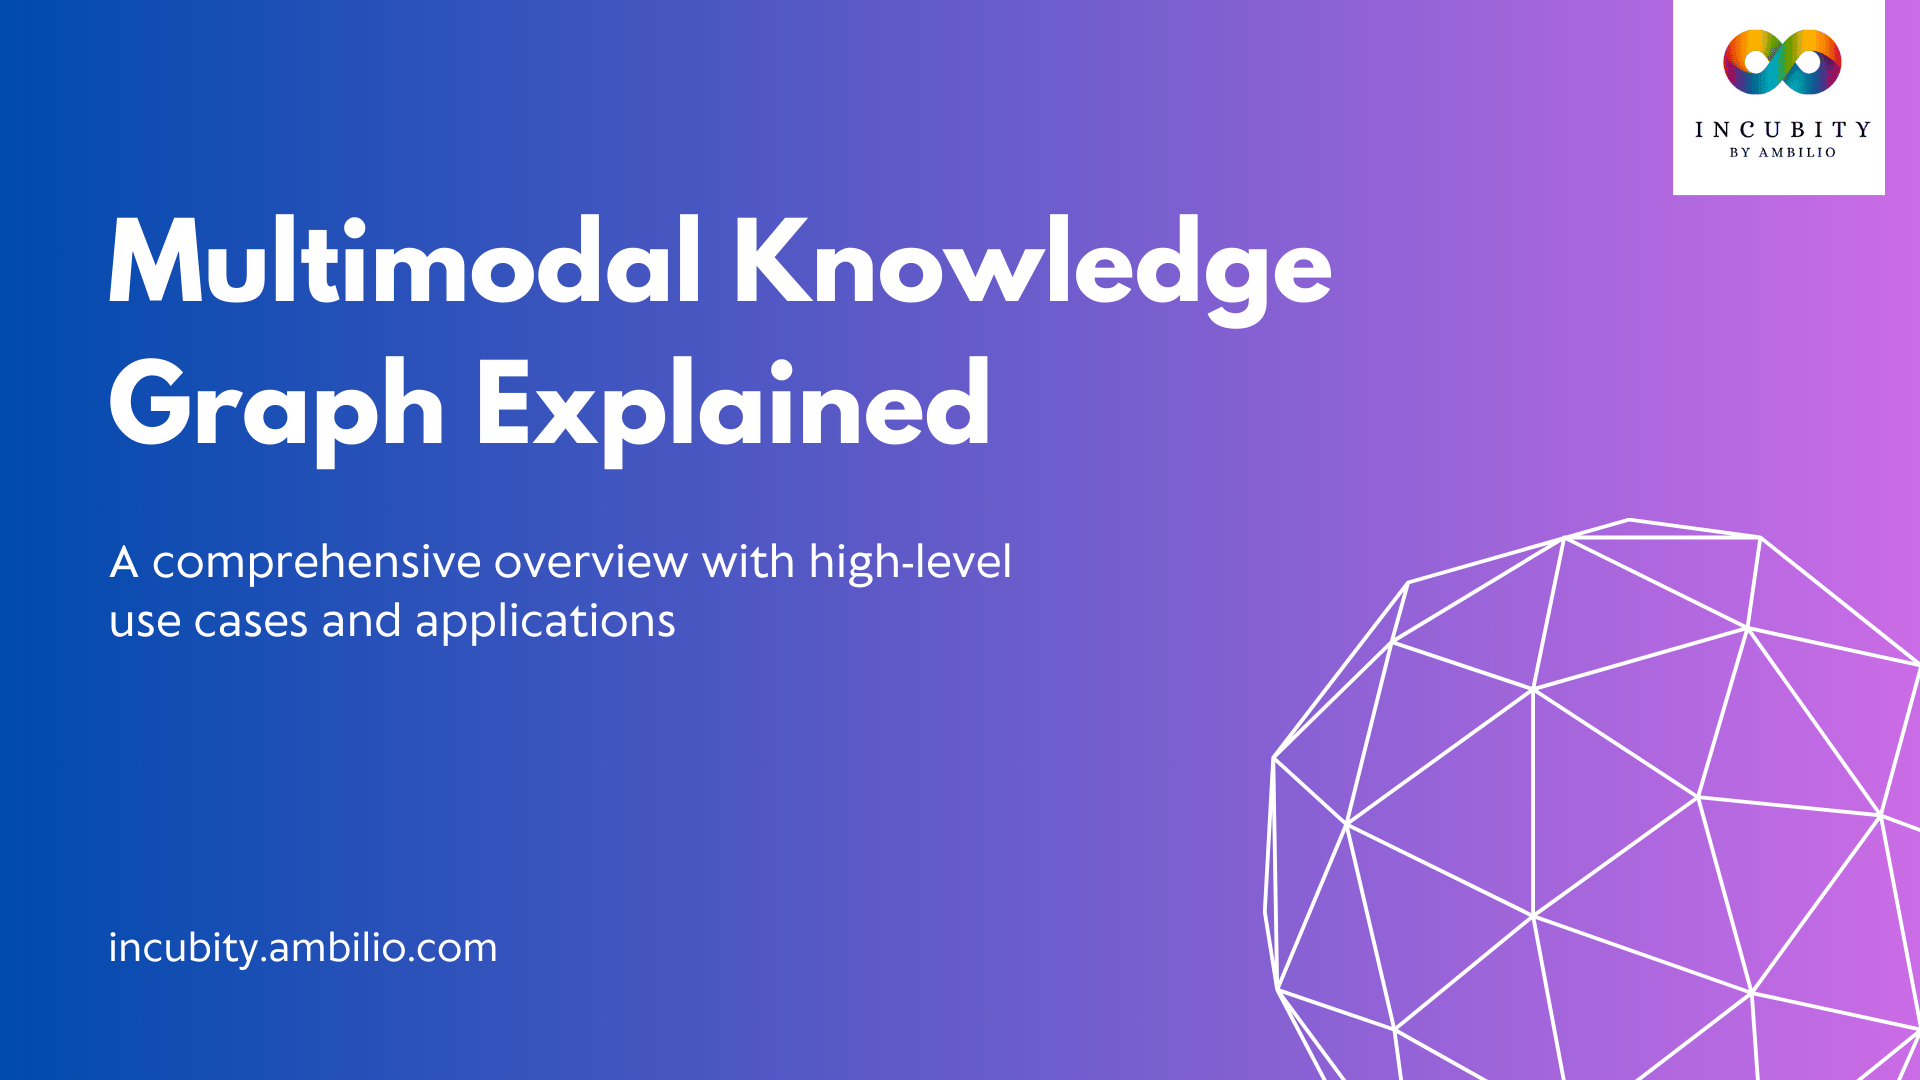 Multimodal Knowledge Graph: A Comprehensive Overview